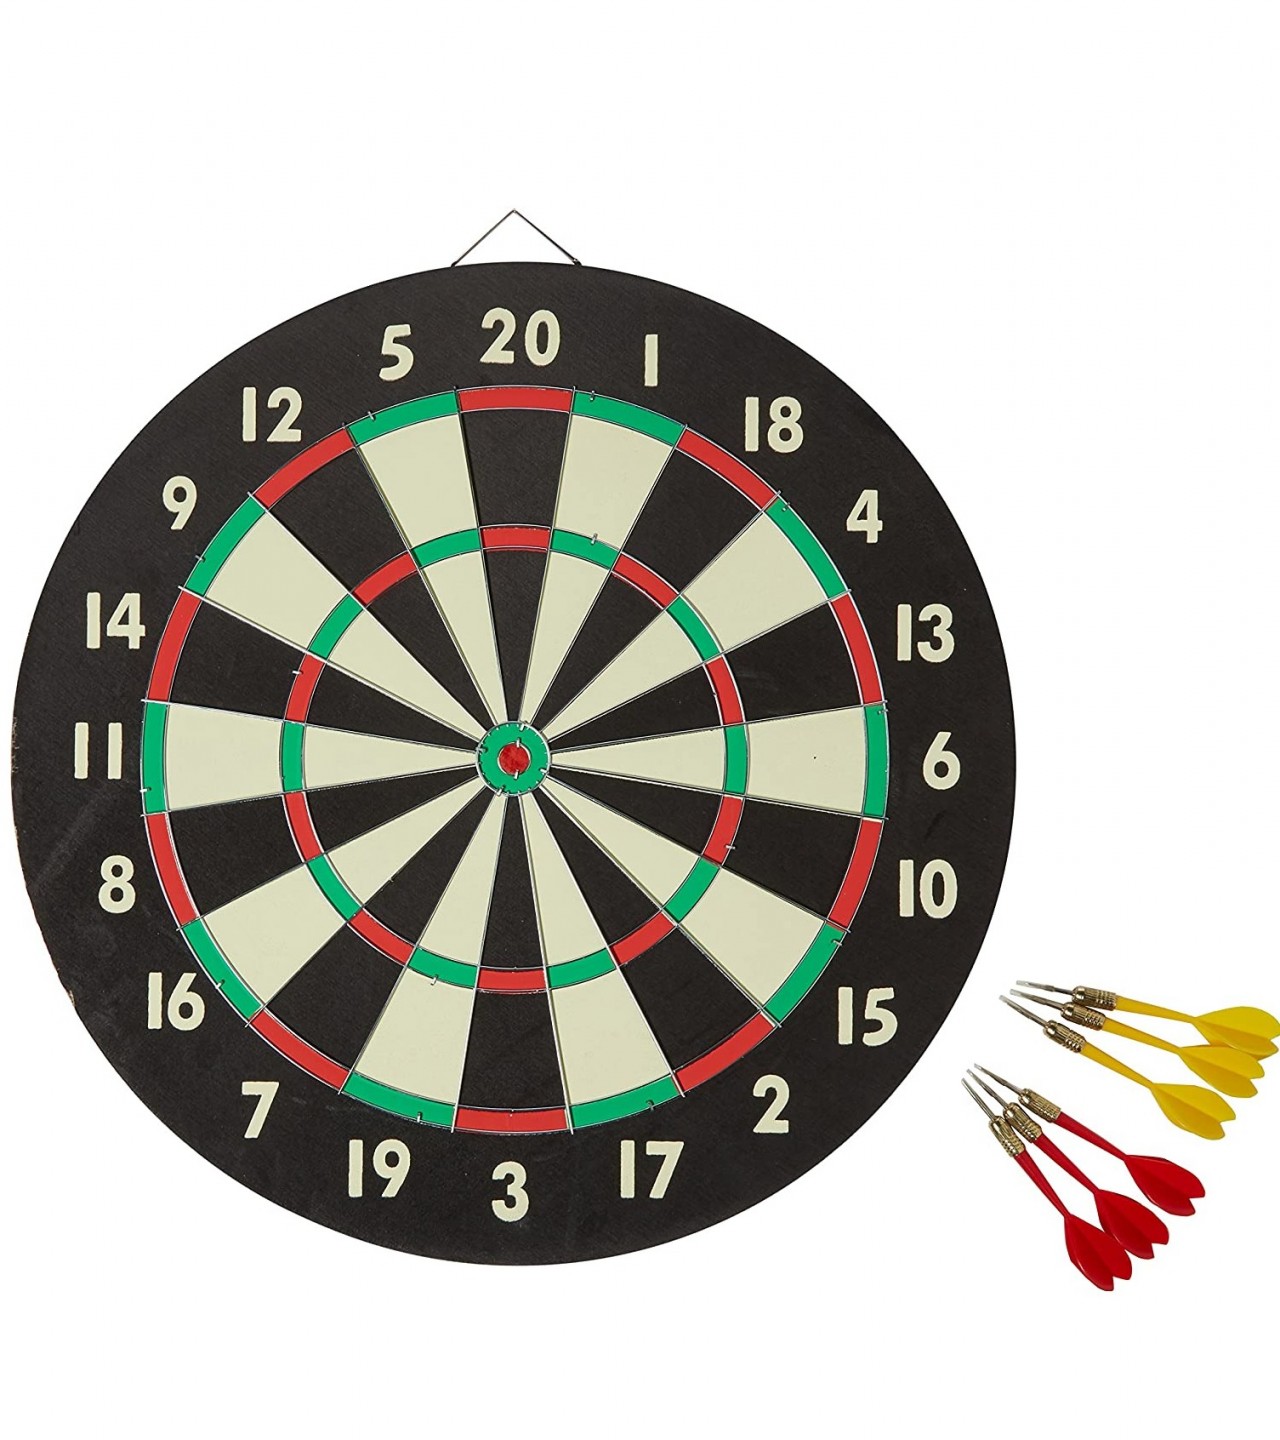 Sunlin Double Sided Dart Board Game - with 6 Darts - Size 15"